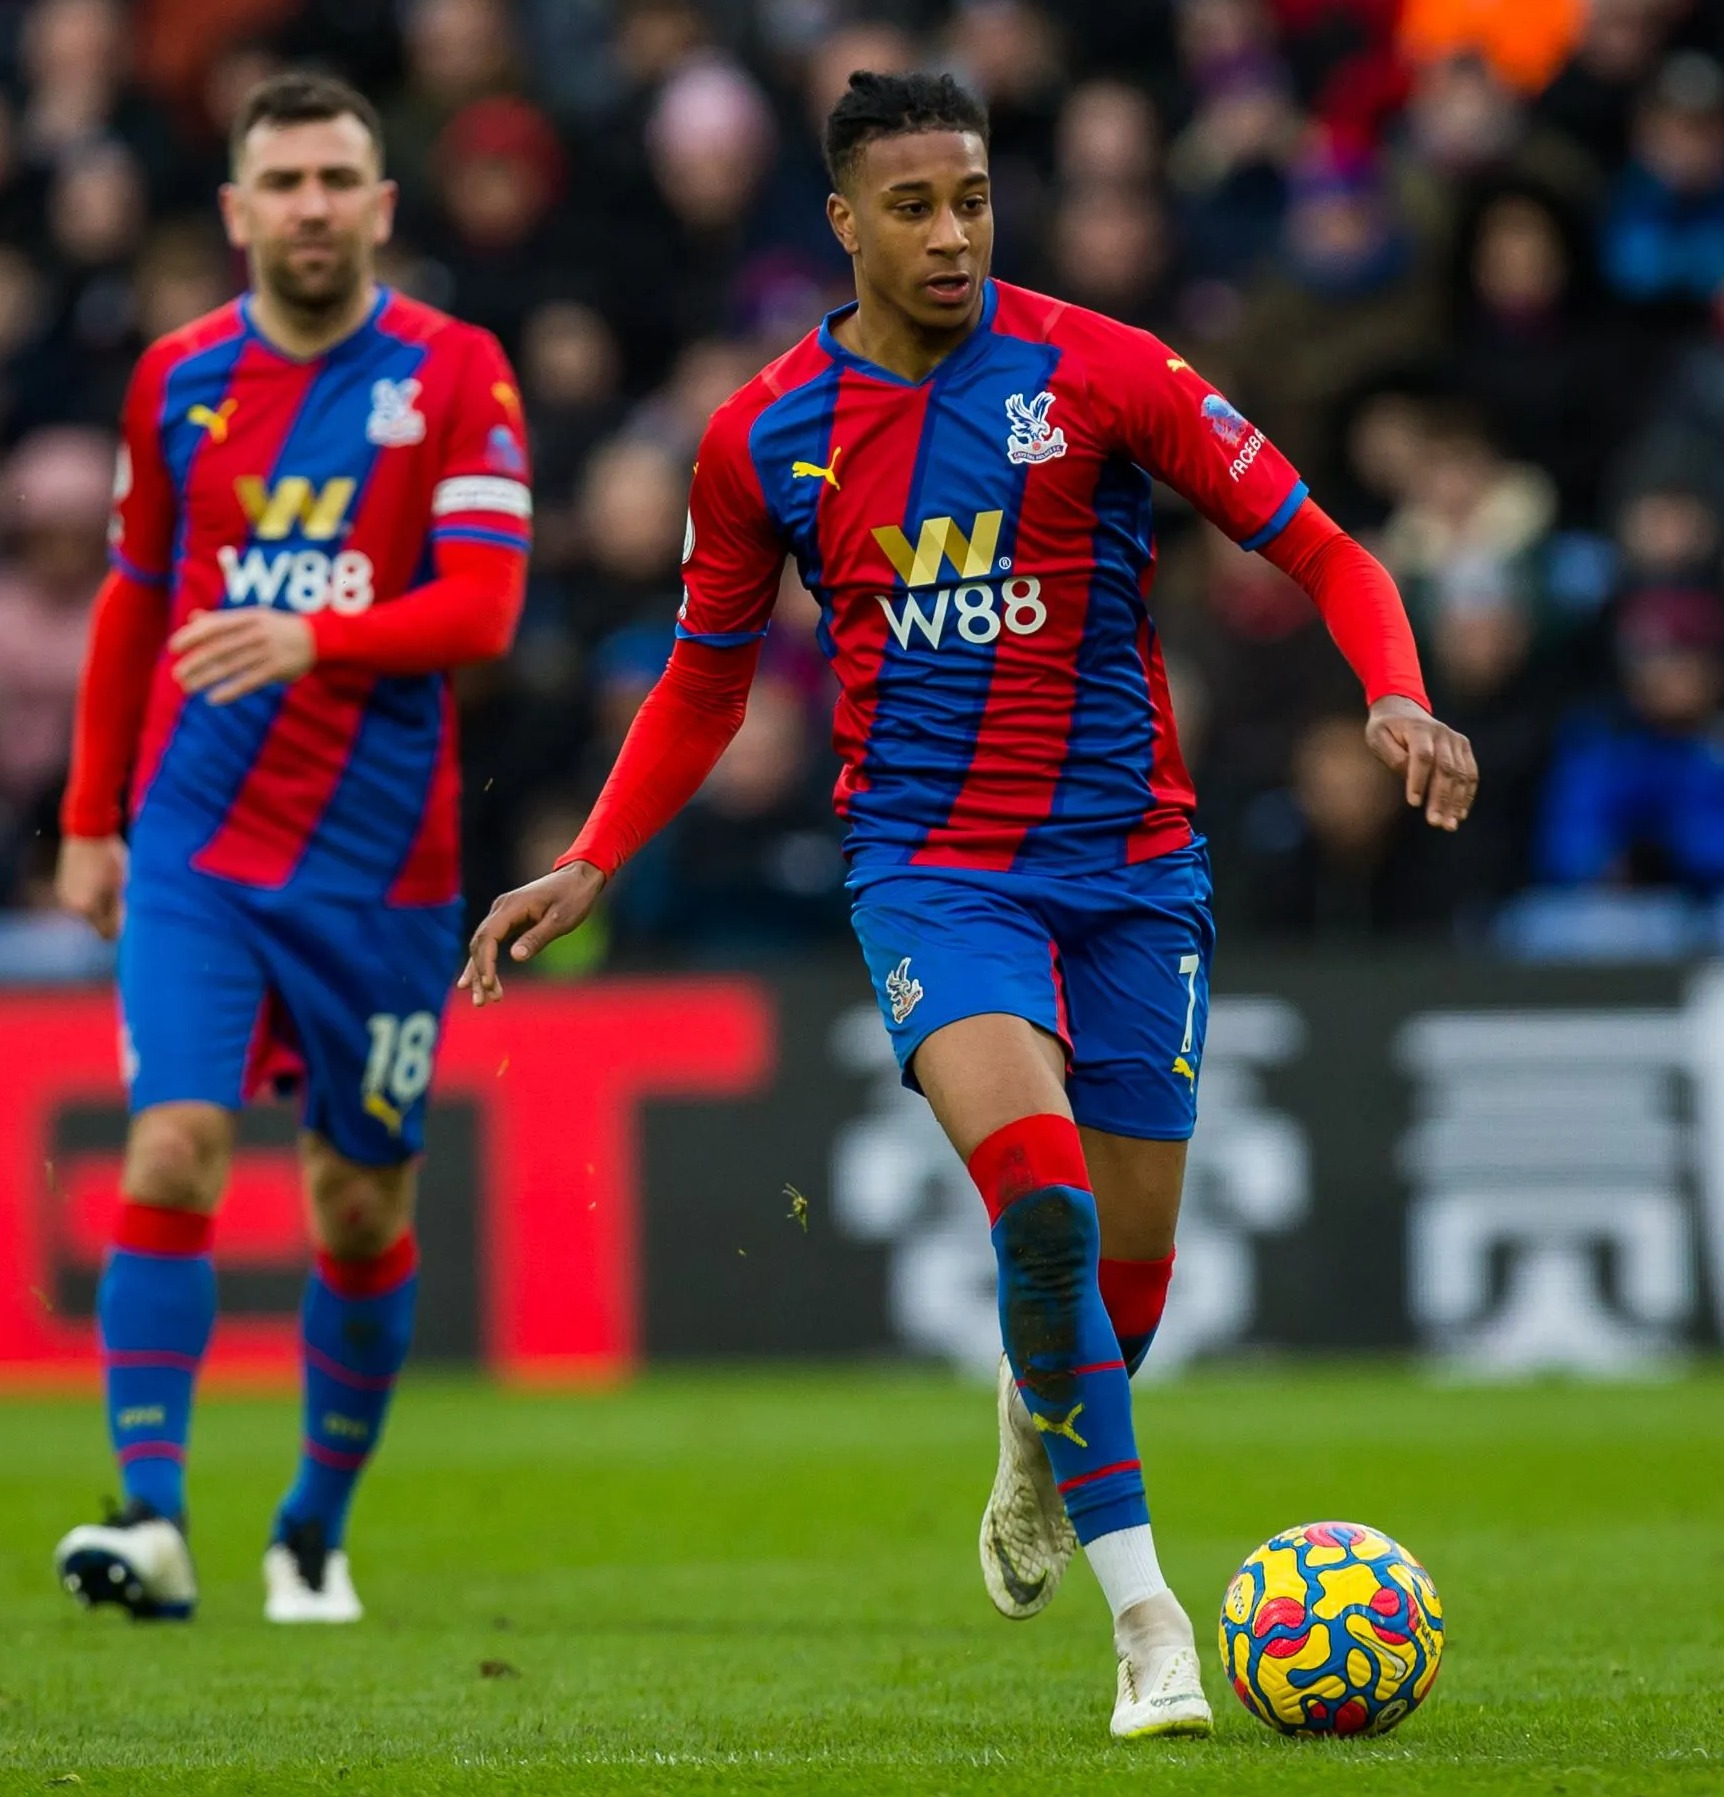 Crystal Palace face transfer fight to hold onto Michael Olise with Arsenal, Chelsea and Bayern Munich all interested